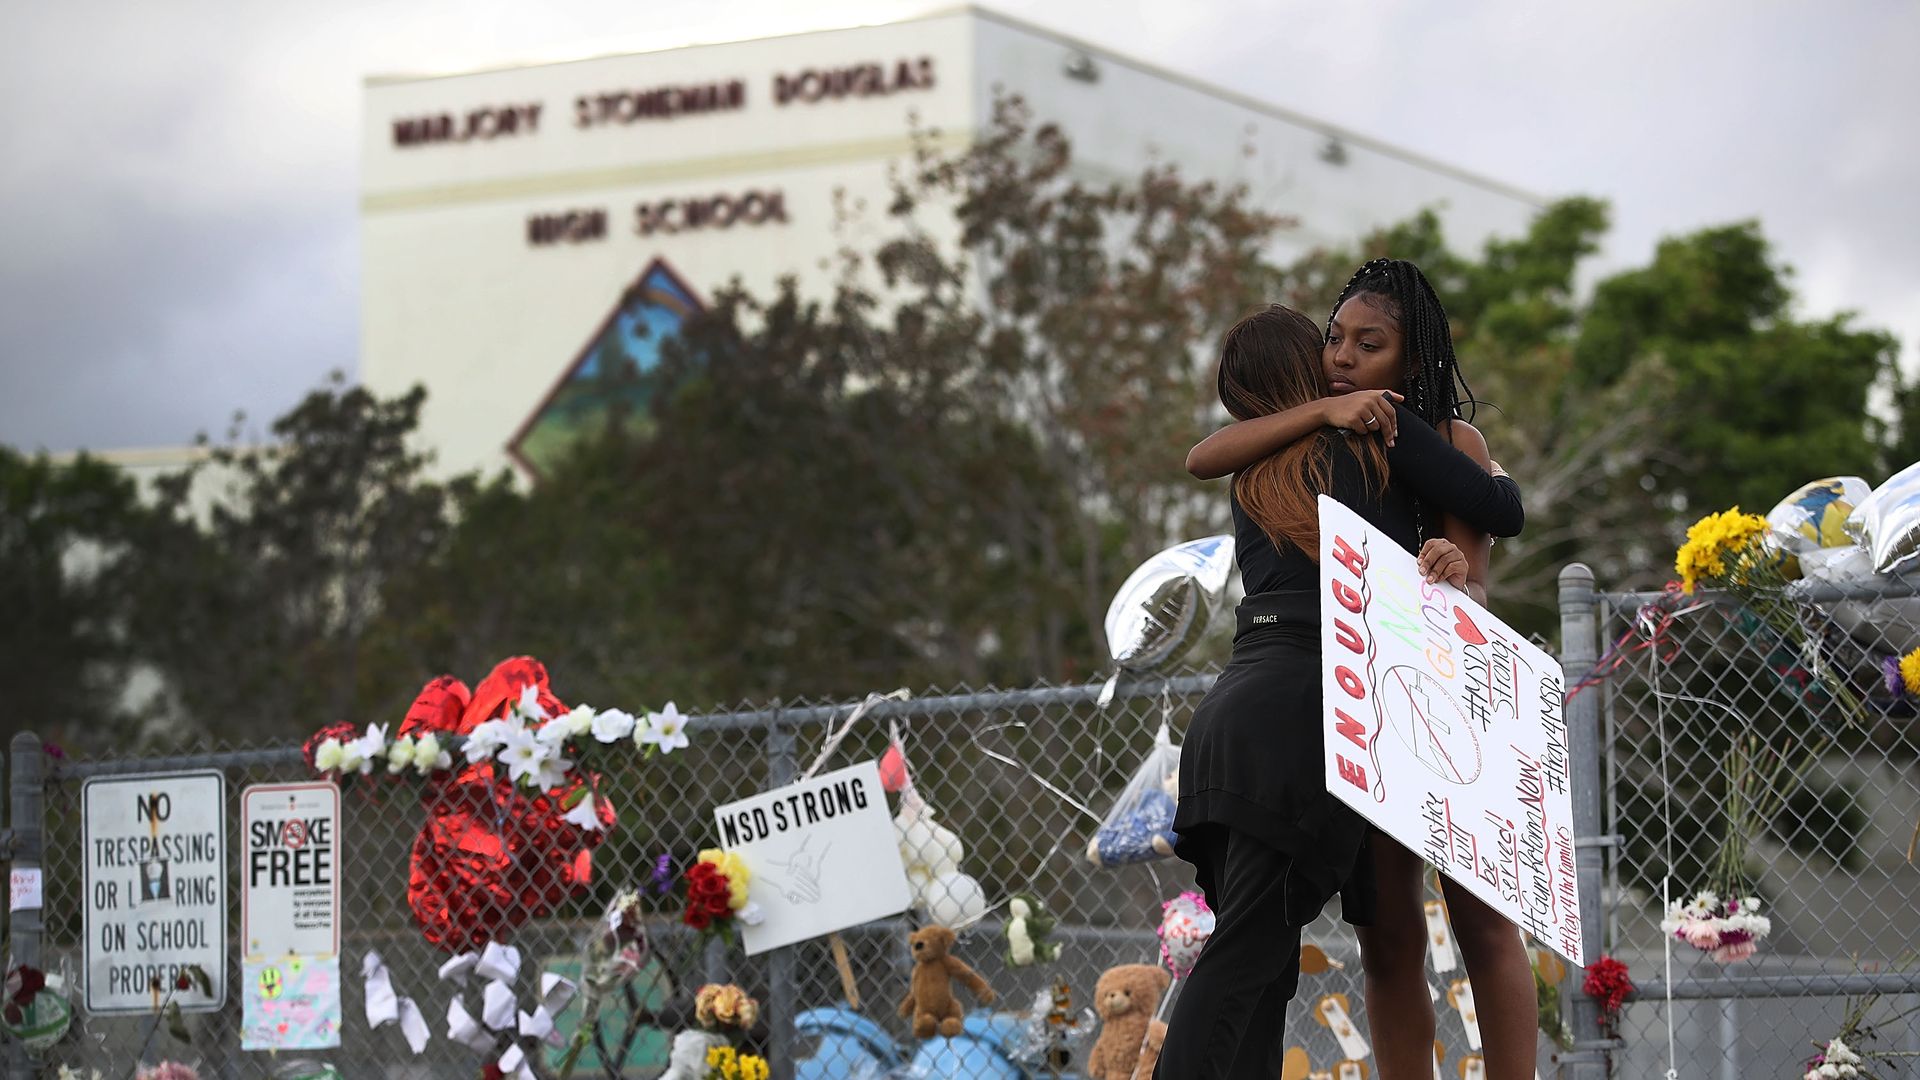 Students comforting each other after a shooting at Marjory Stoneman Douglas High School in Parkland, Florida